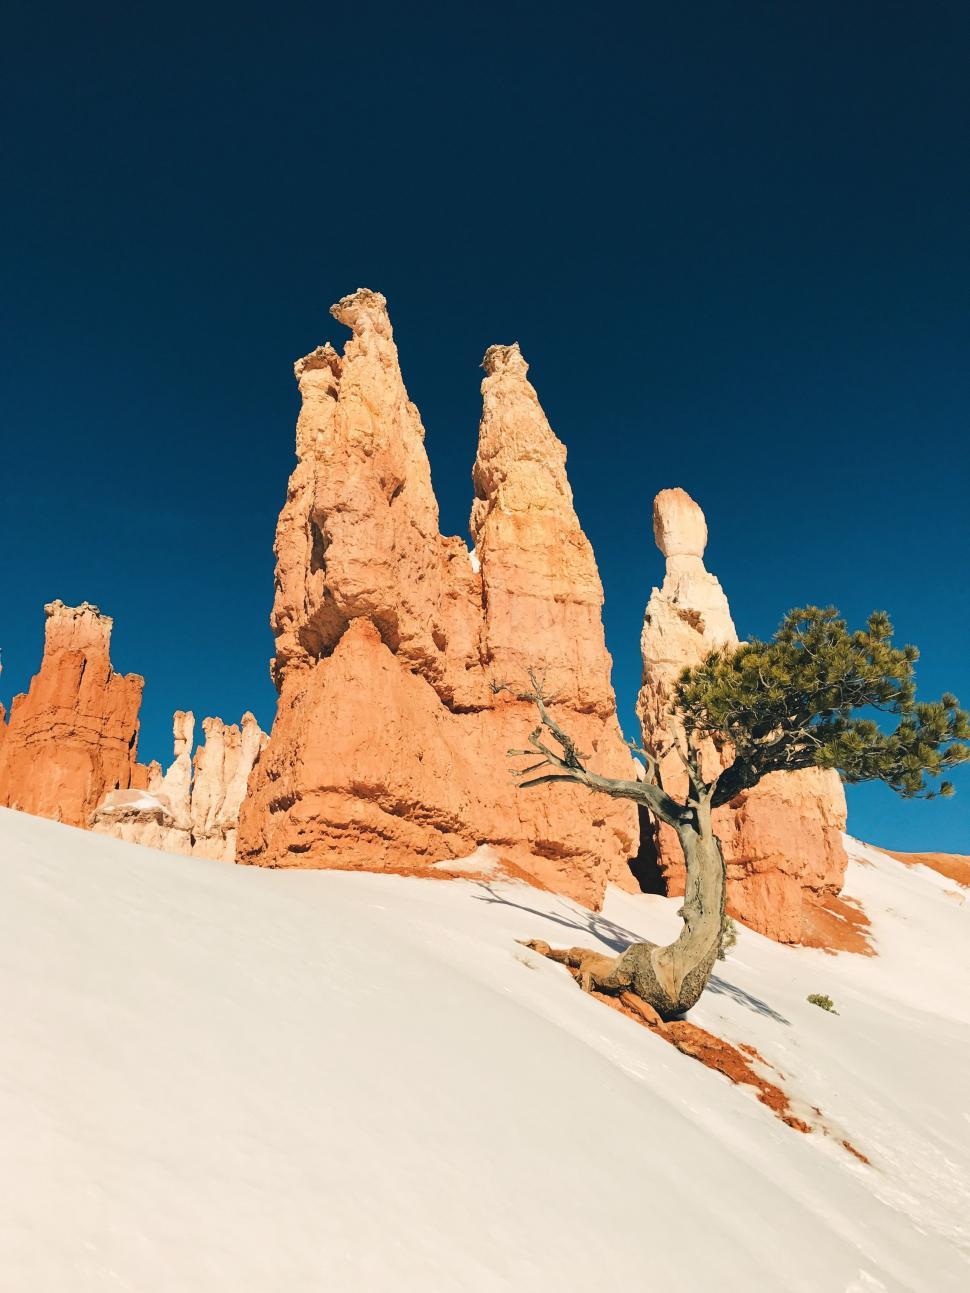 Free Image of Lone Tree Standing in Snowy Wilderness 